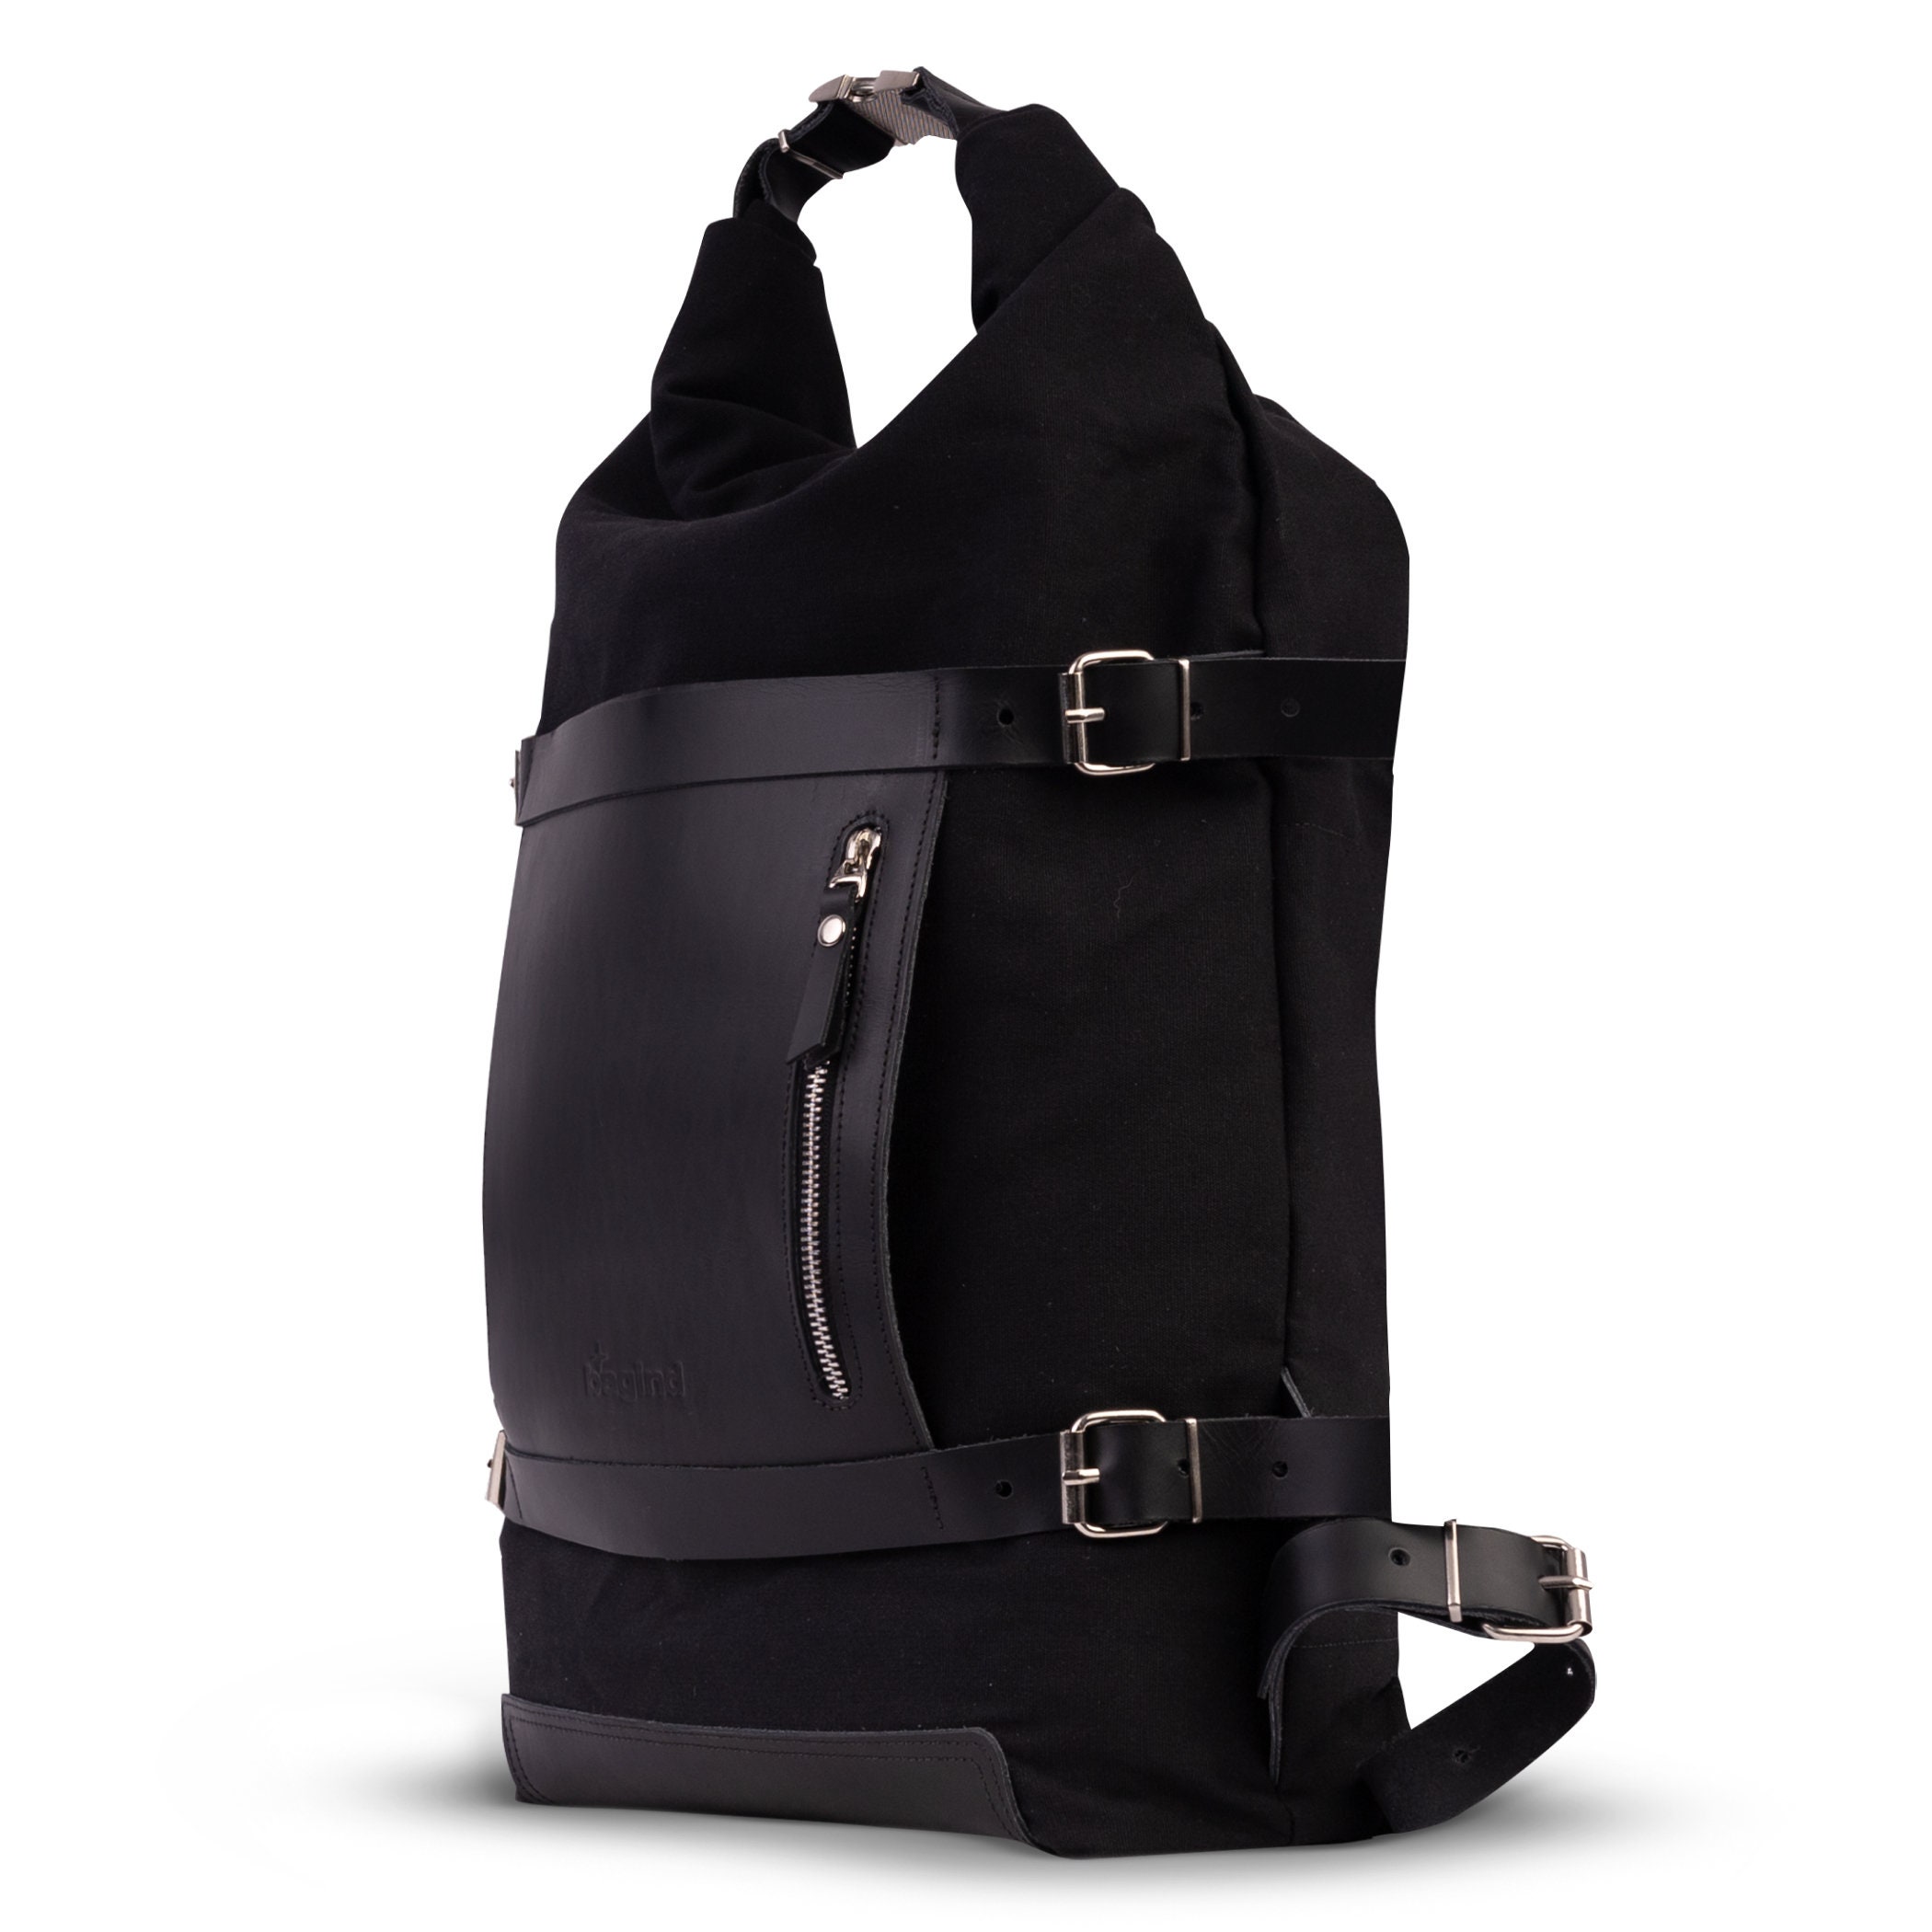 Premium Leather Backpack Straps by MacCase